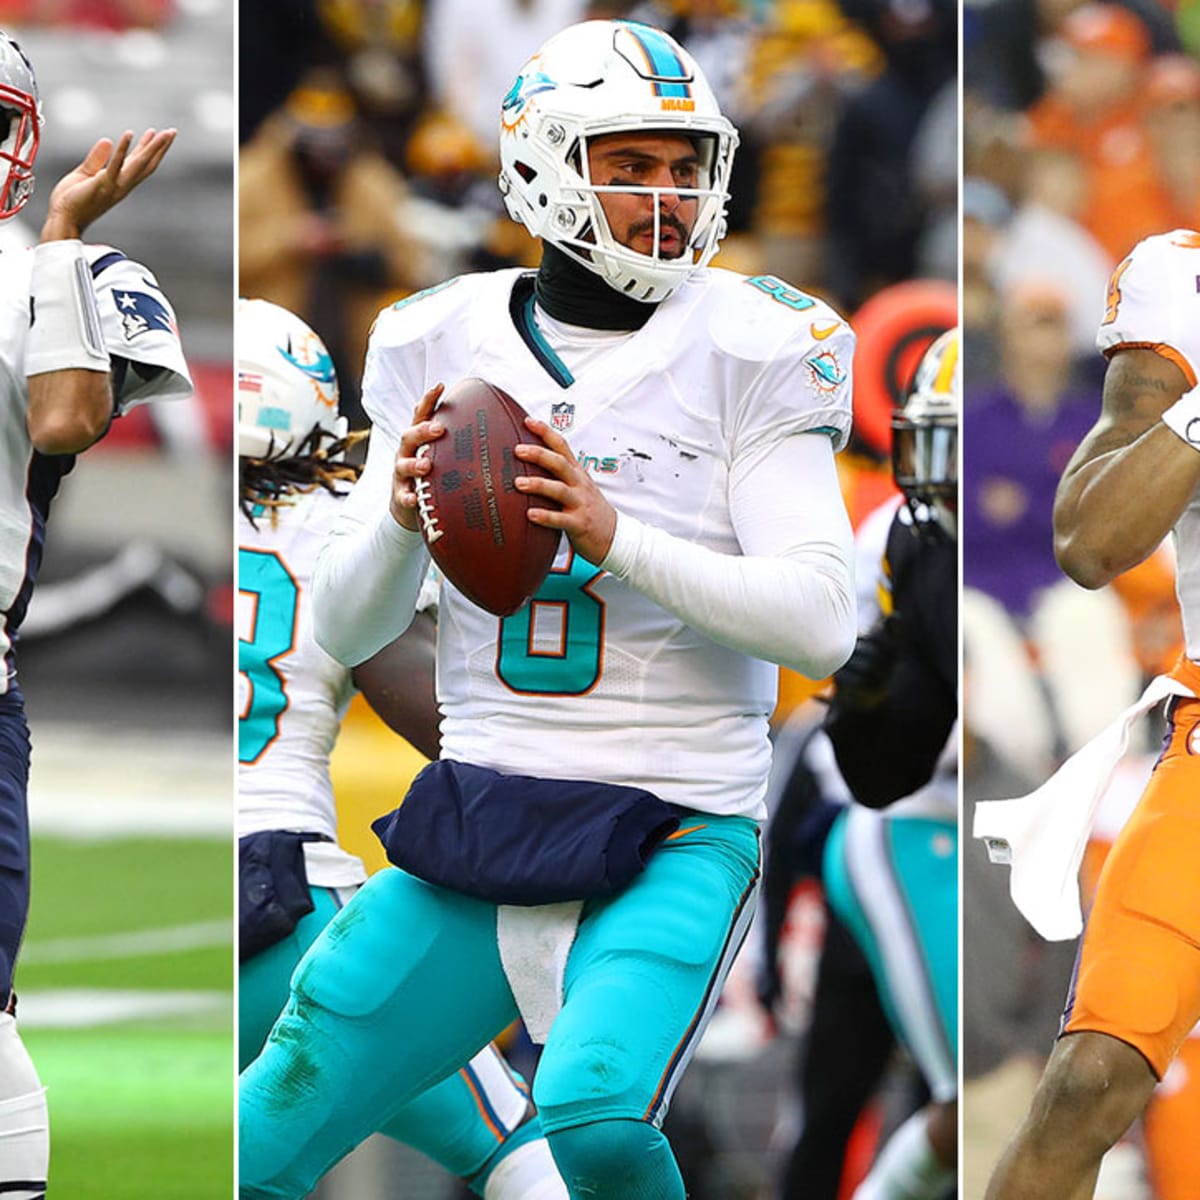 Who is the best backup QB in the NFL?